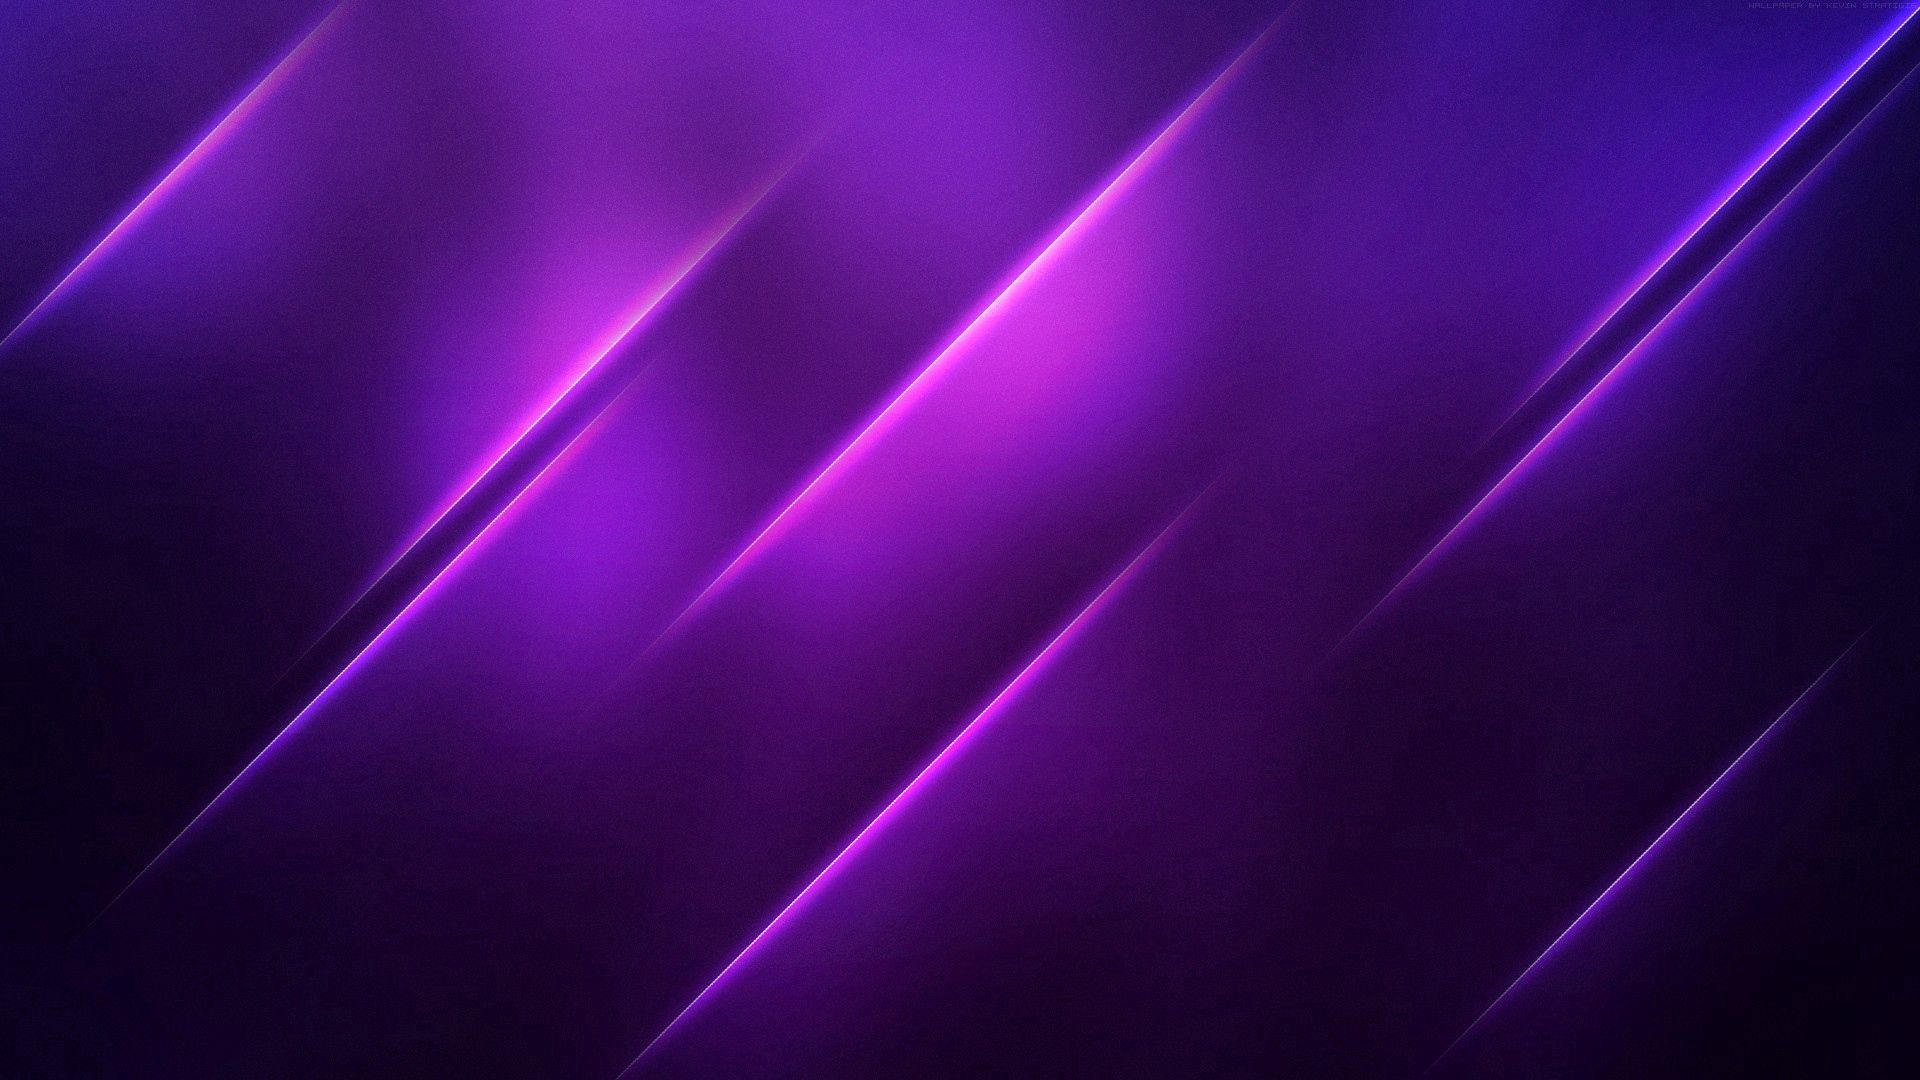 HD wallpaper violet, abstract, bright, lines, purple, obliquely